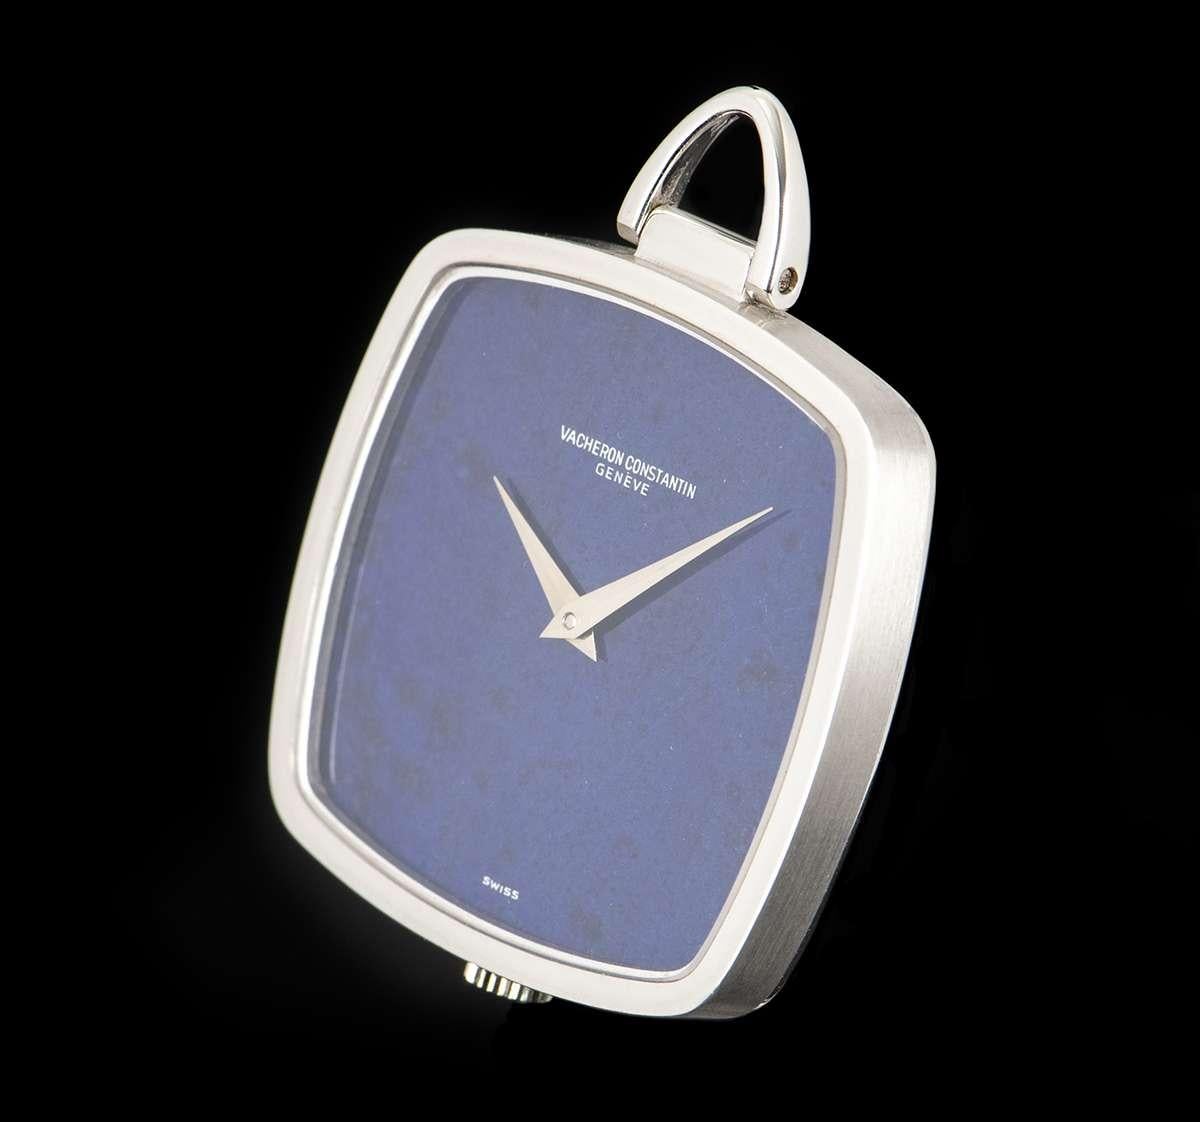 An 18k White Gold Pendant Gents Pocket Watch, lapis lazuli dial, a fixed 18k white gold bezel, sapphire glass, manual wind movement, in excellent condition - original caseback sticker still attached, comes with the original Vacheron Constantin